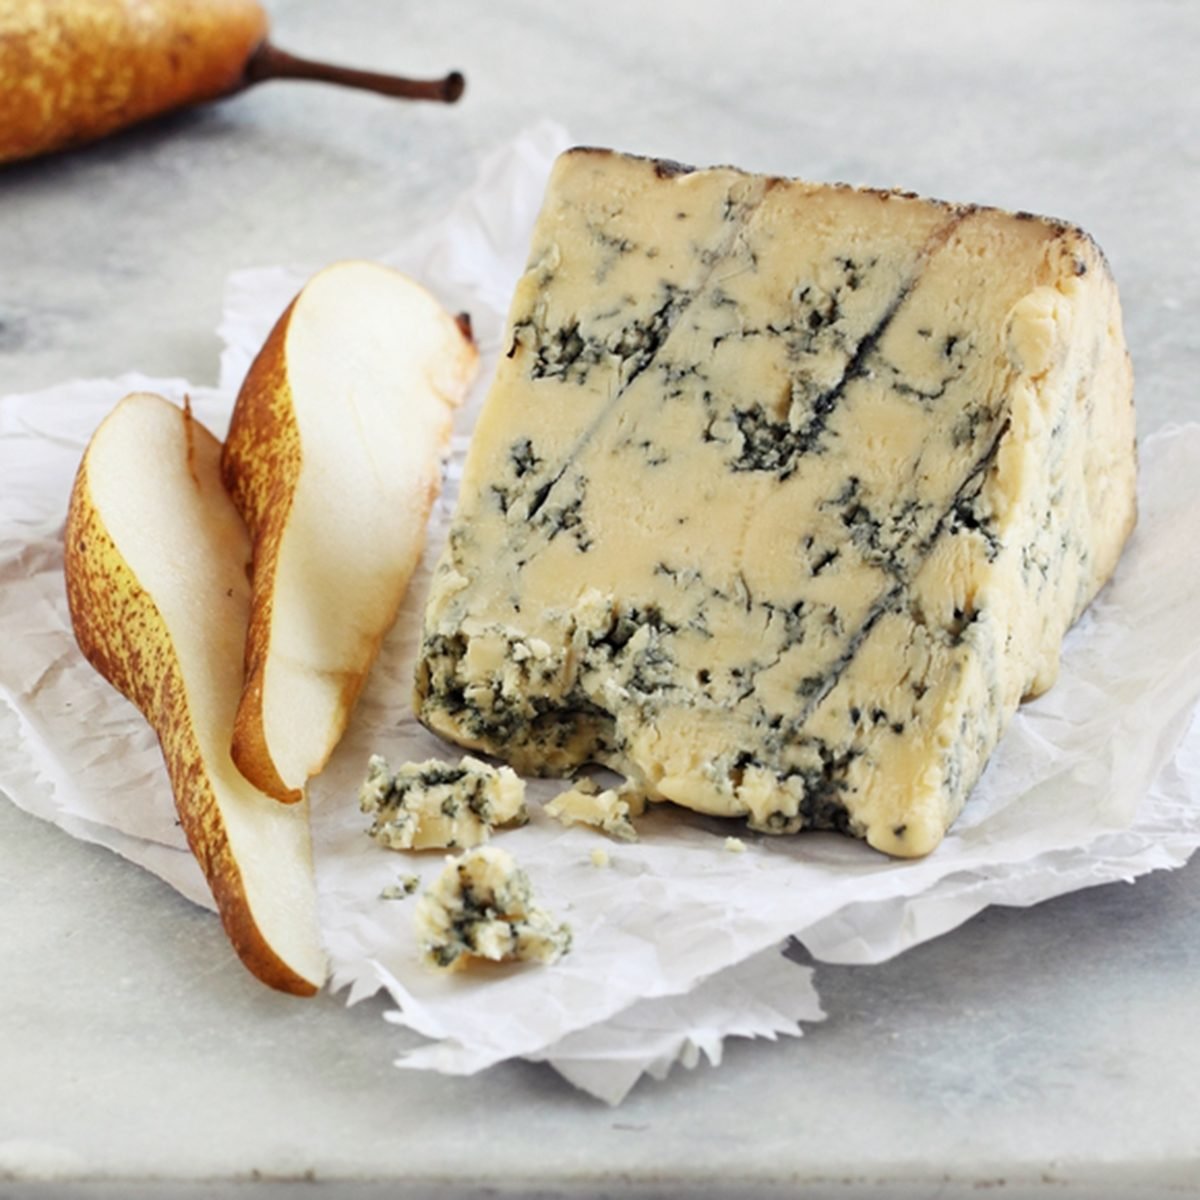 Blue cheese and pear on a marble cutting board. Old english Stilton cheese.